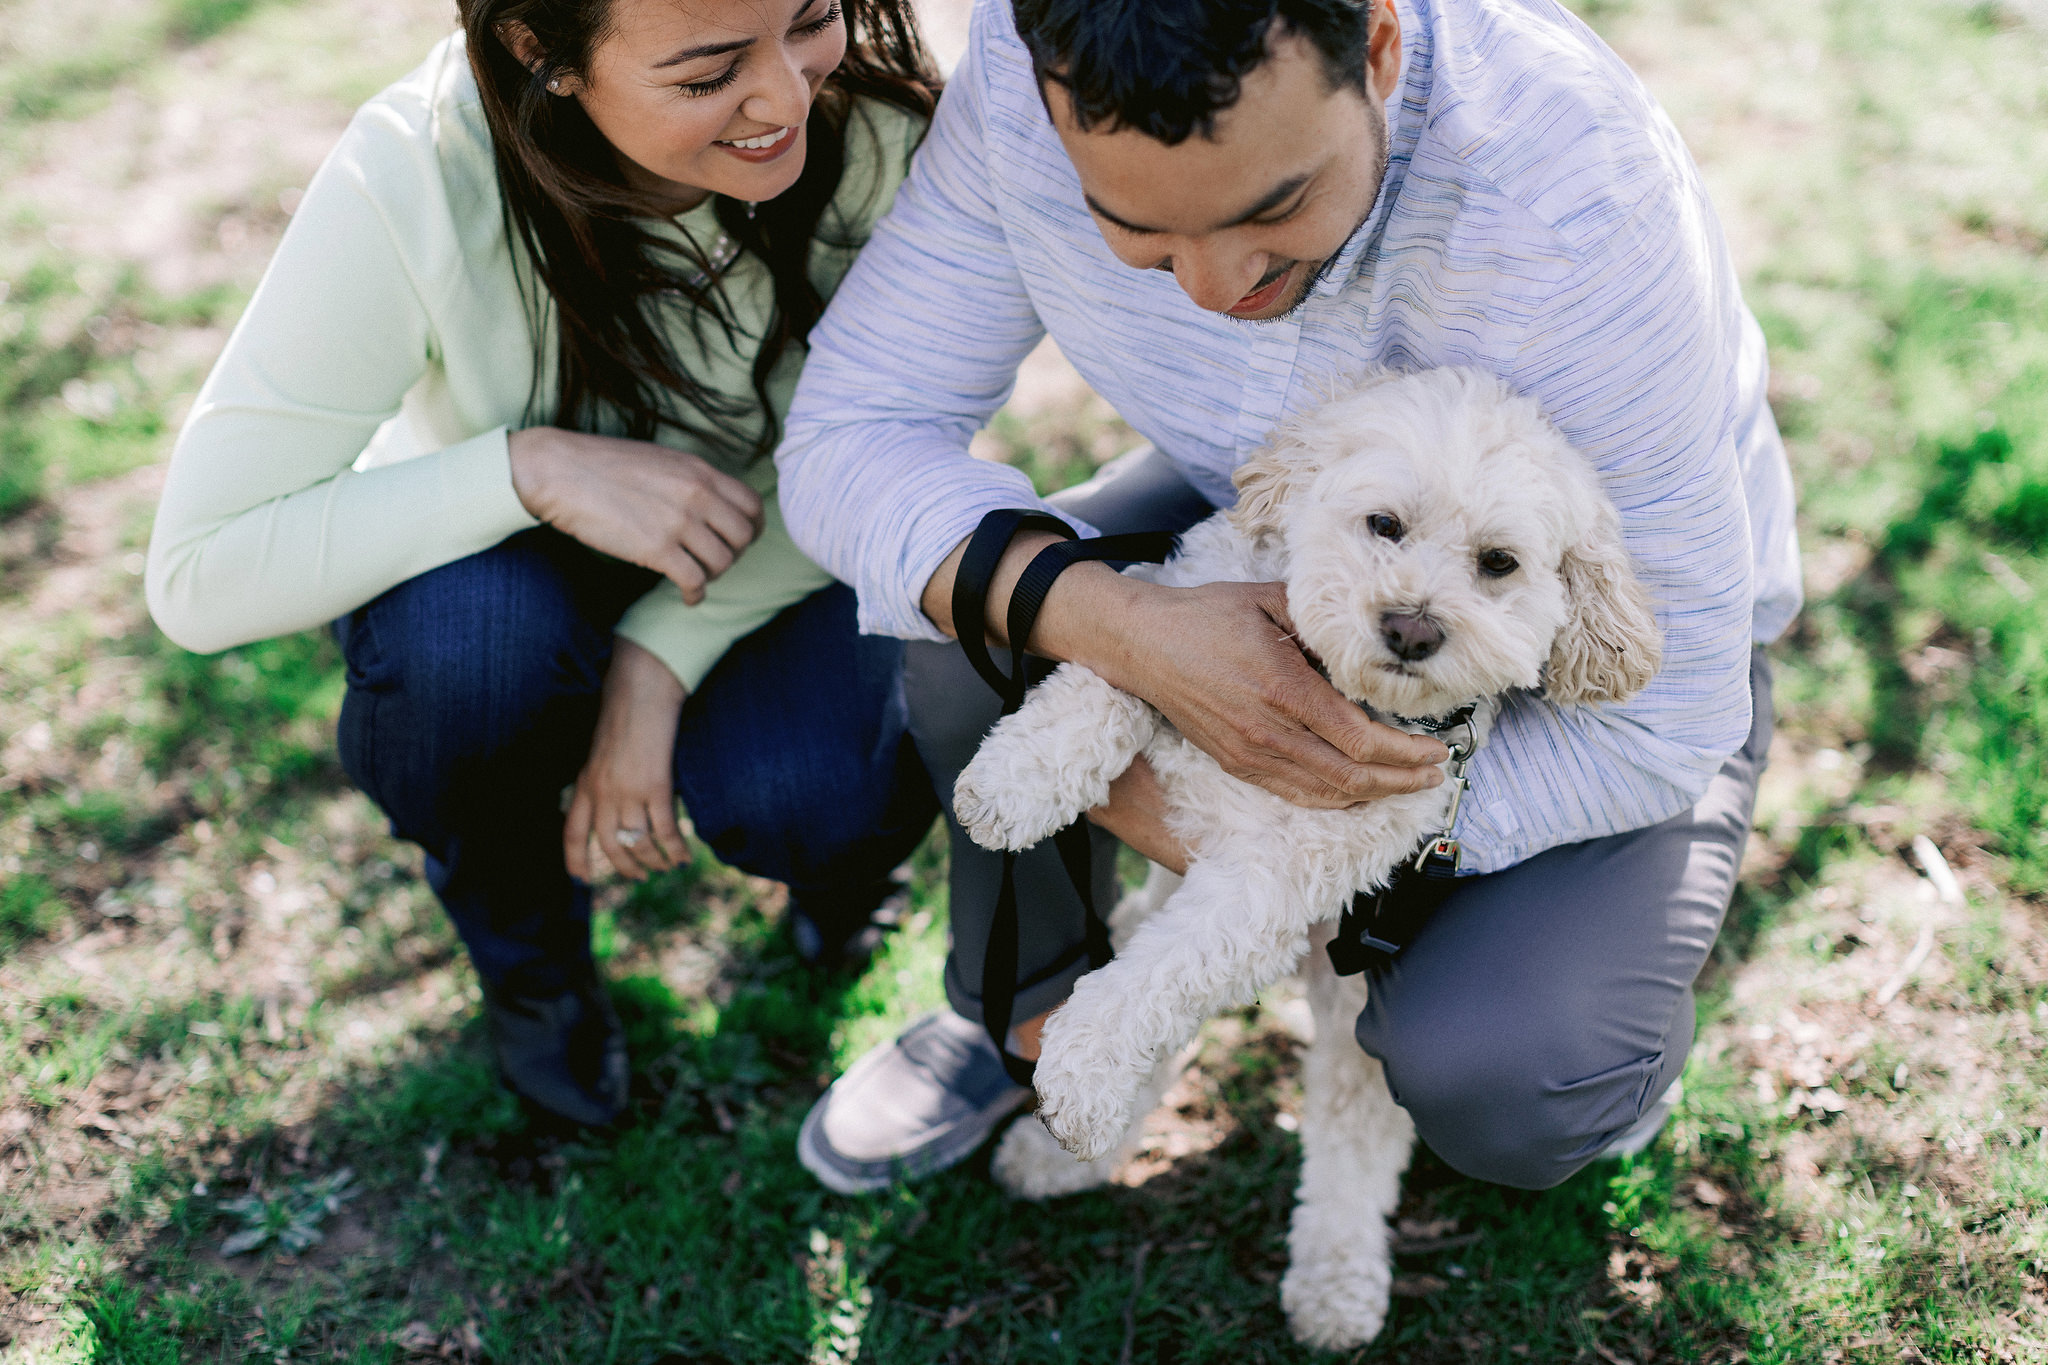 Best NY engagement spots with your dogs. The engaged couple is cuddling their dog. Image by Jenny Fu Stuio